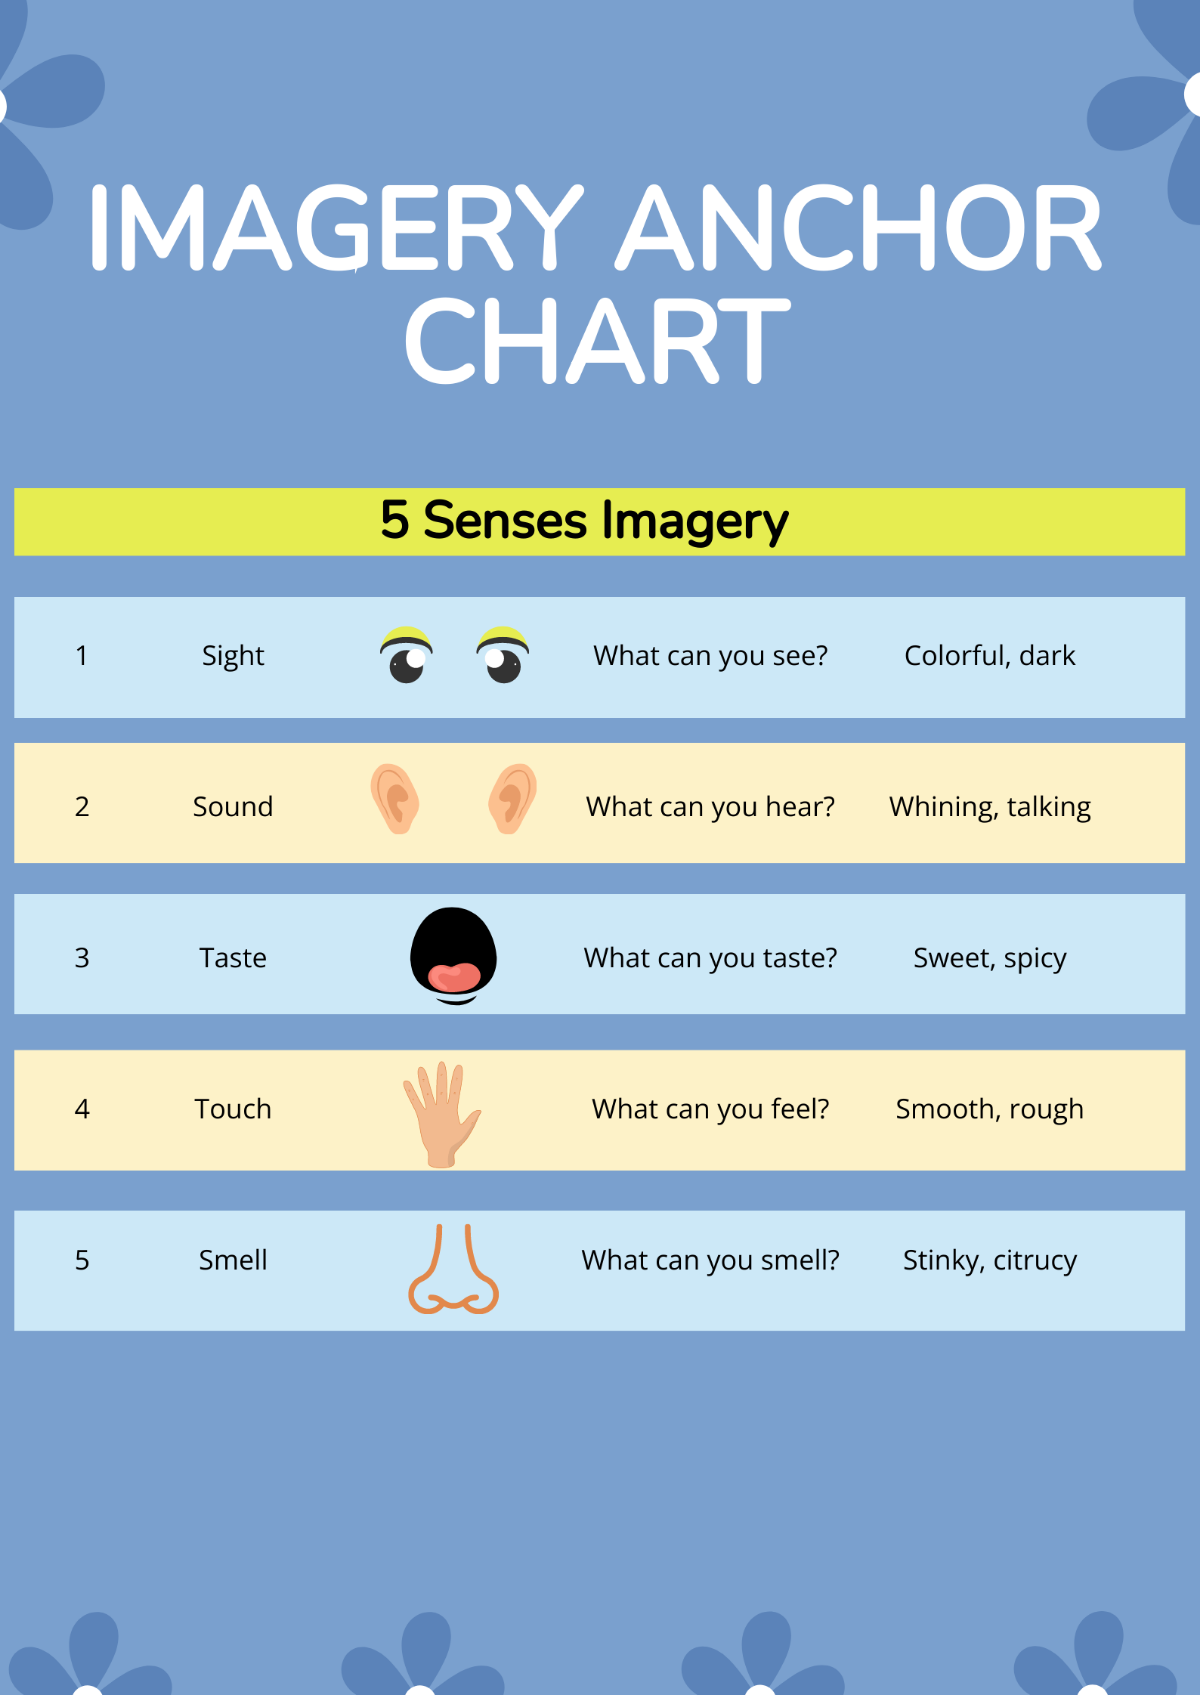 Imagery Anchor Chart Template